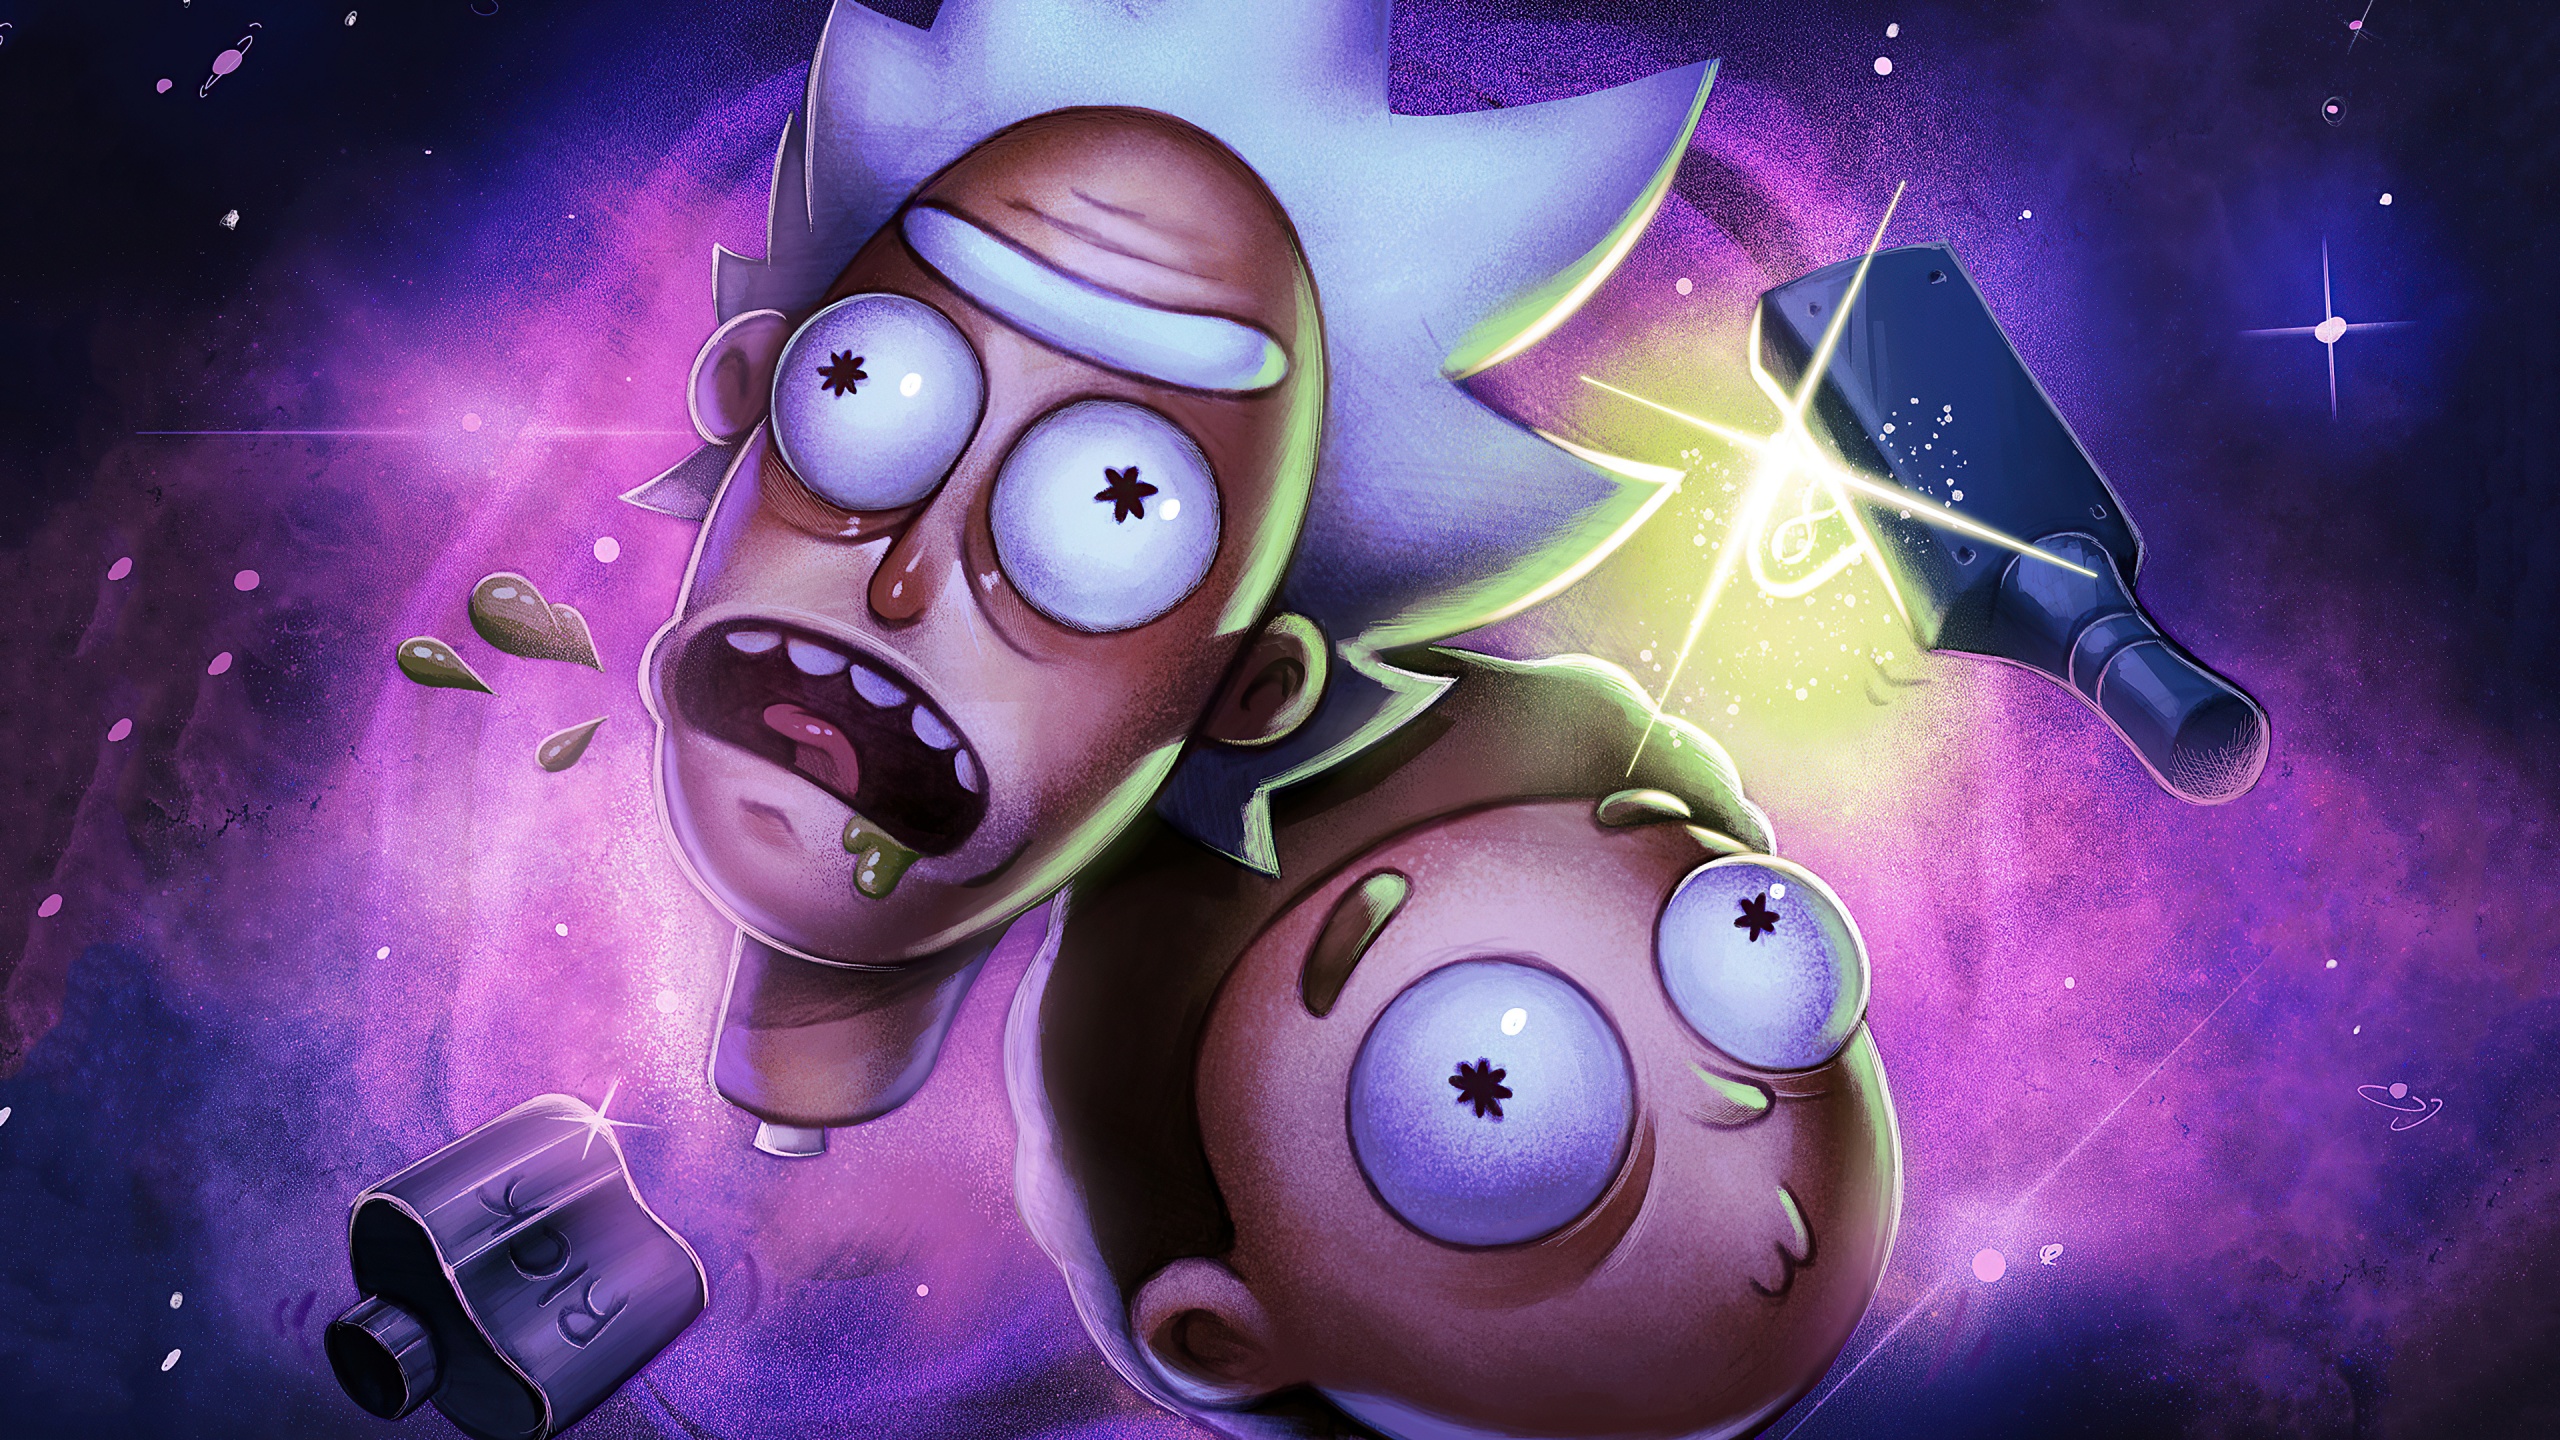 Rick And Morty Amoled 4k Wallpapers - Wallpaper Cave